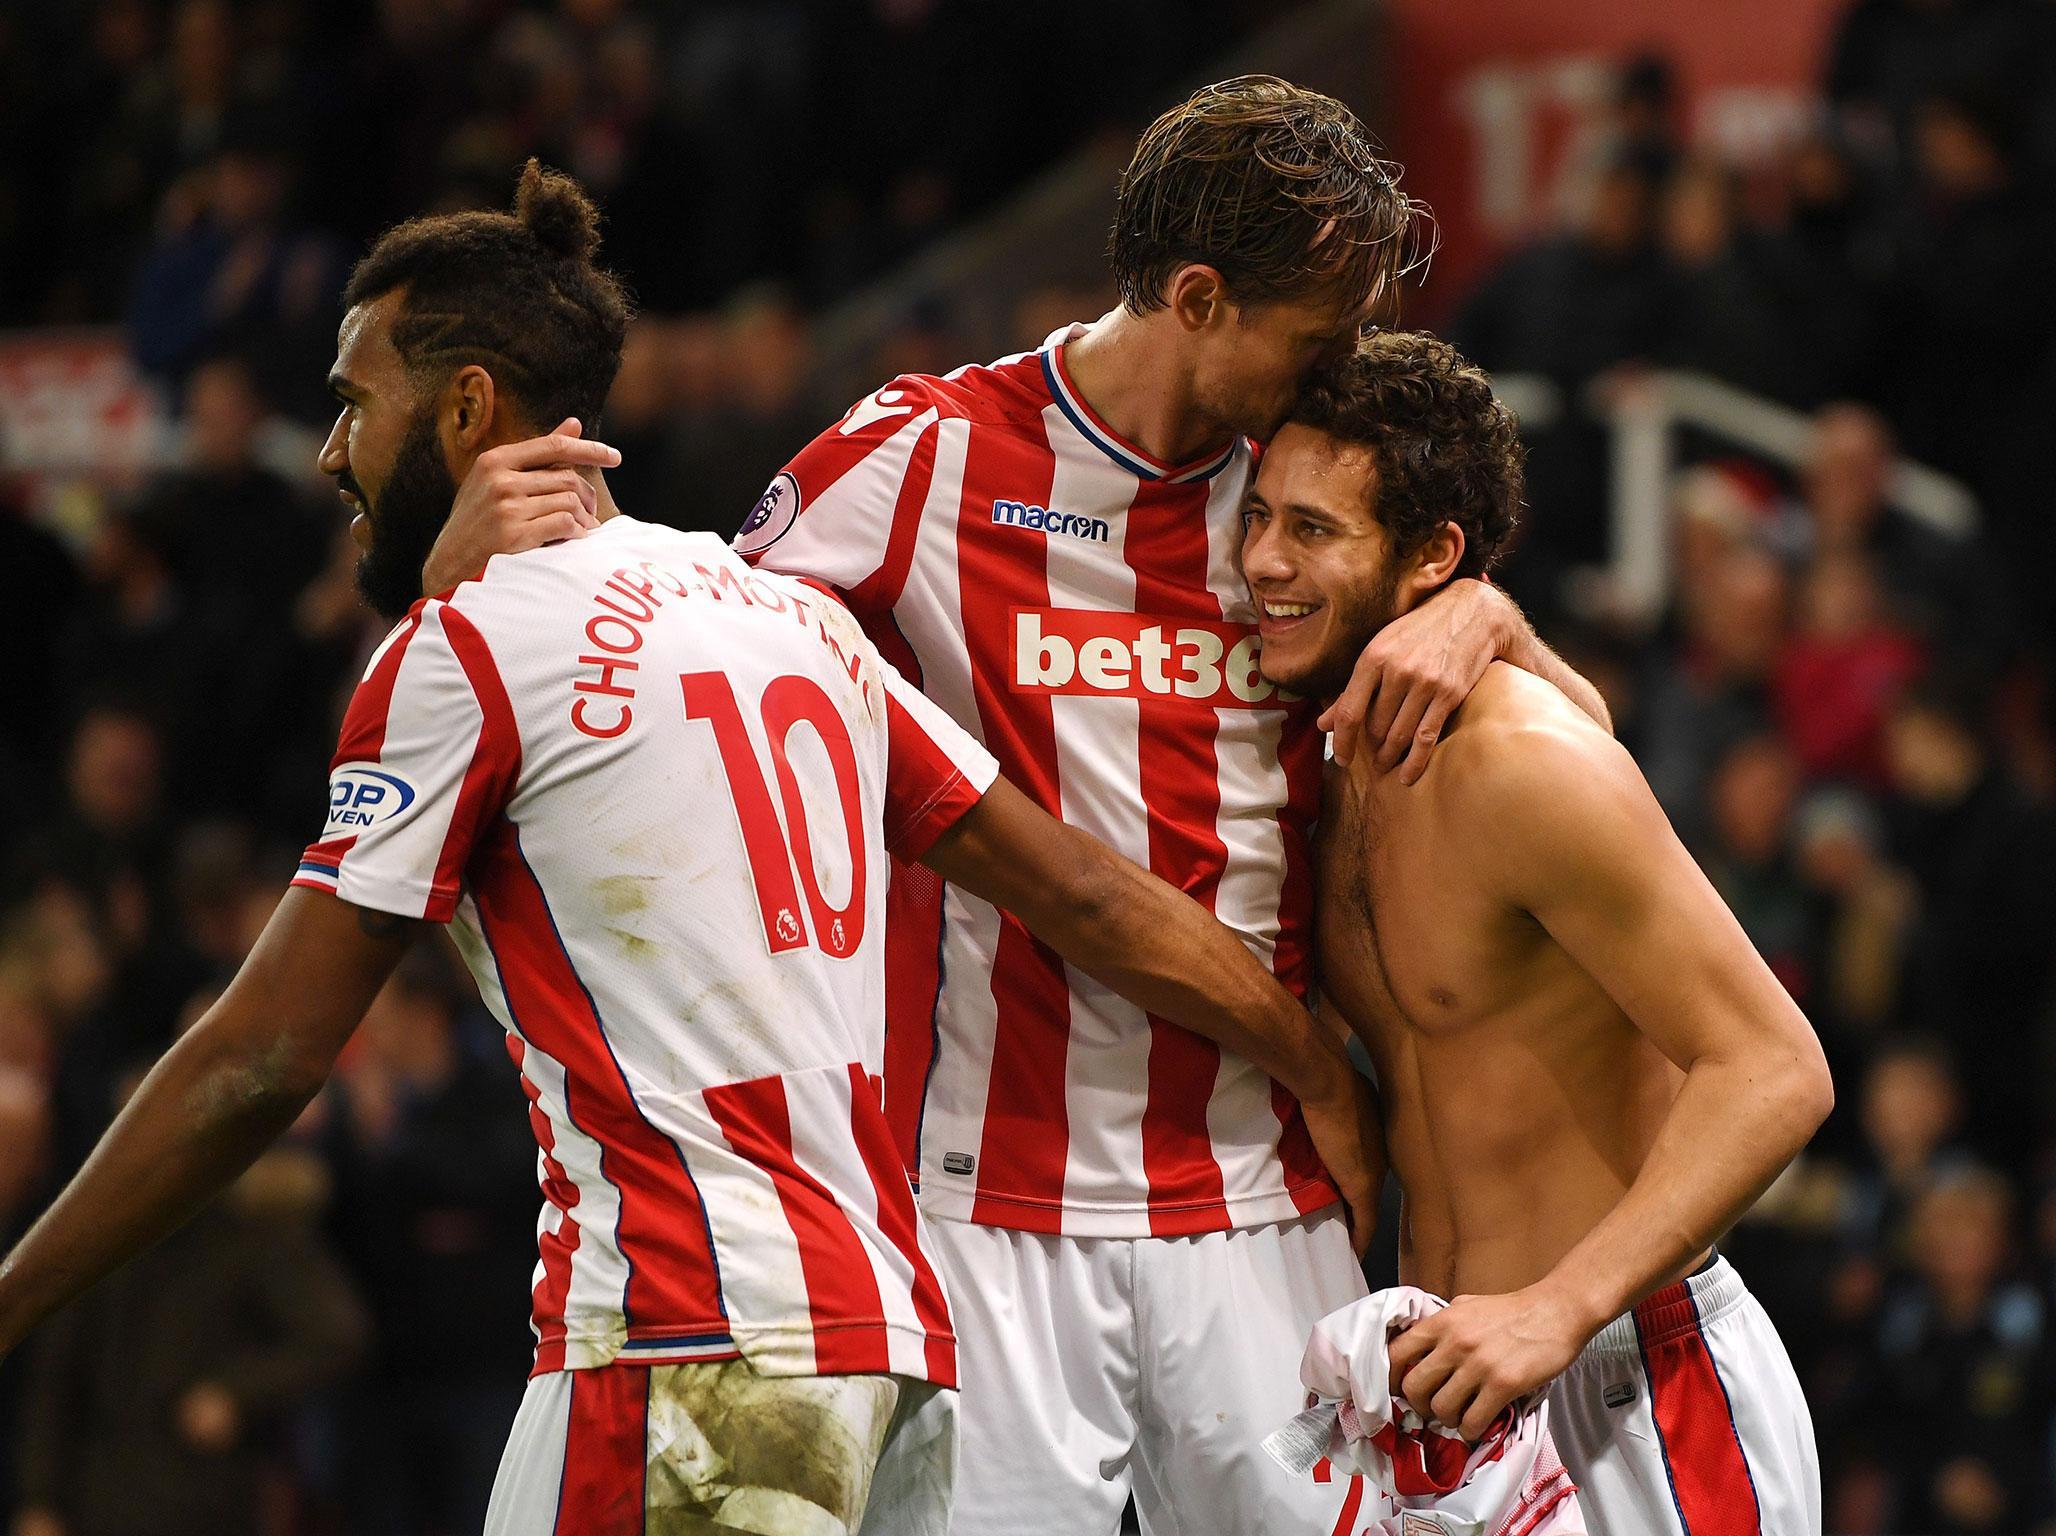 Stoke bagged a priceless win to ease the pressure on Hughes